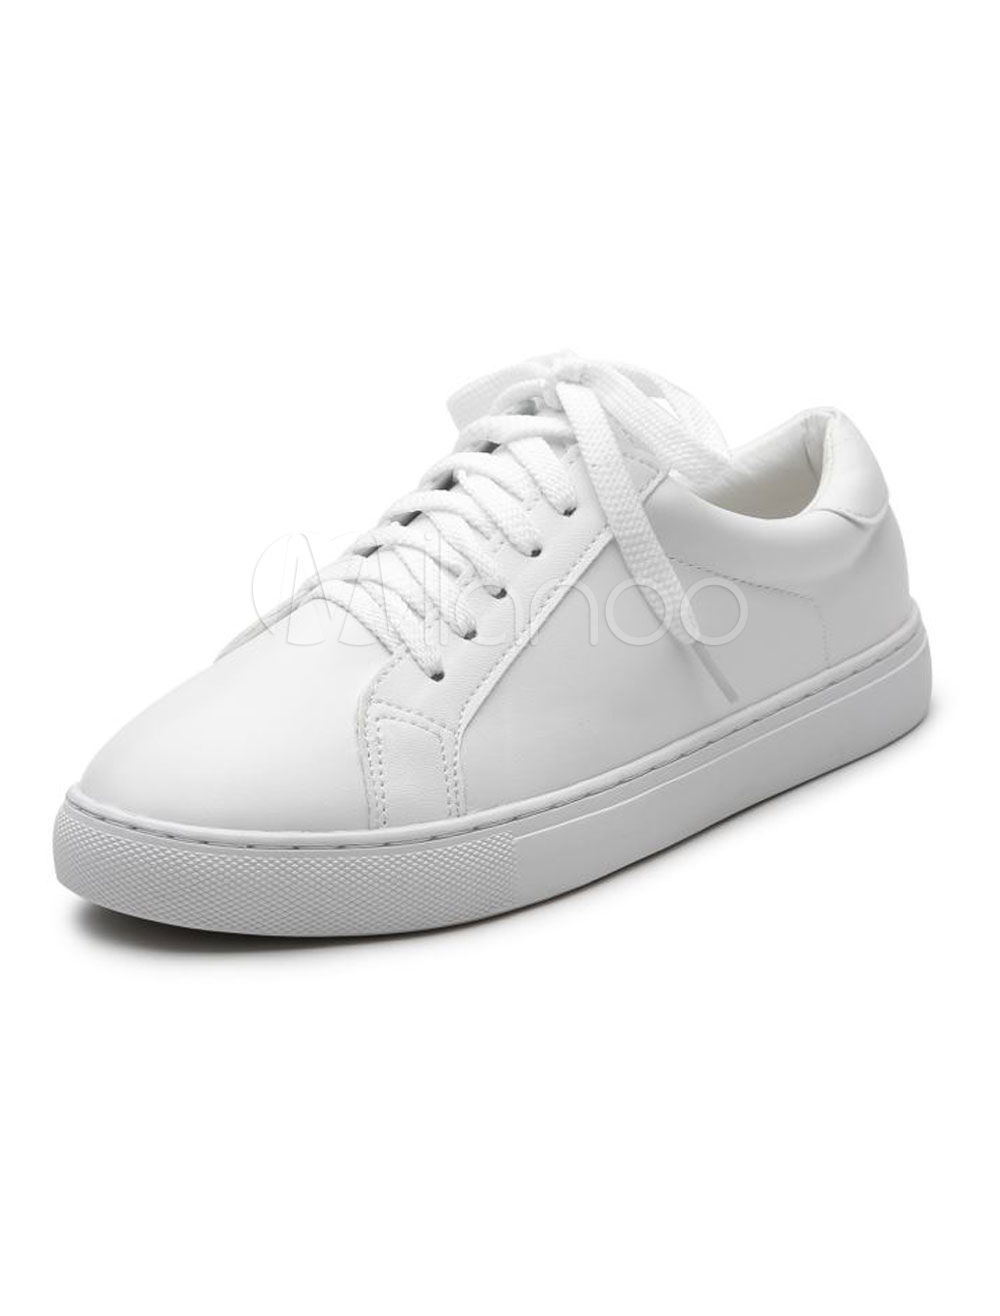 White Skate Shoes Women Round Toe Lace Up Sneakers - Milanoo.com